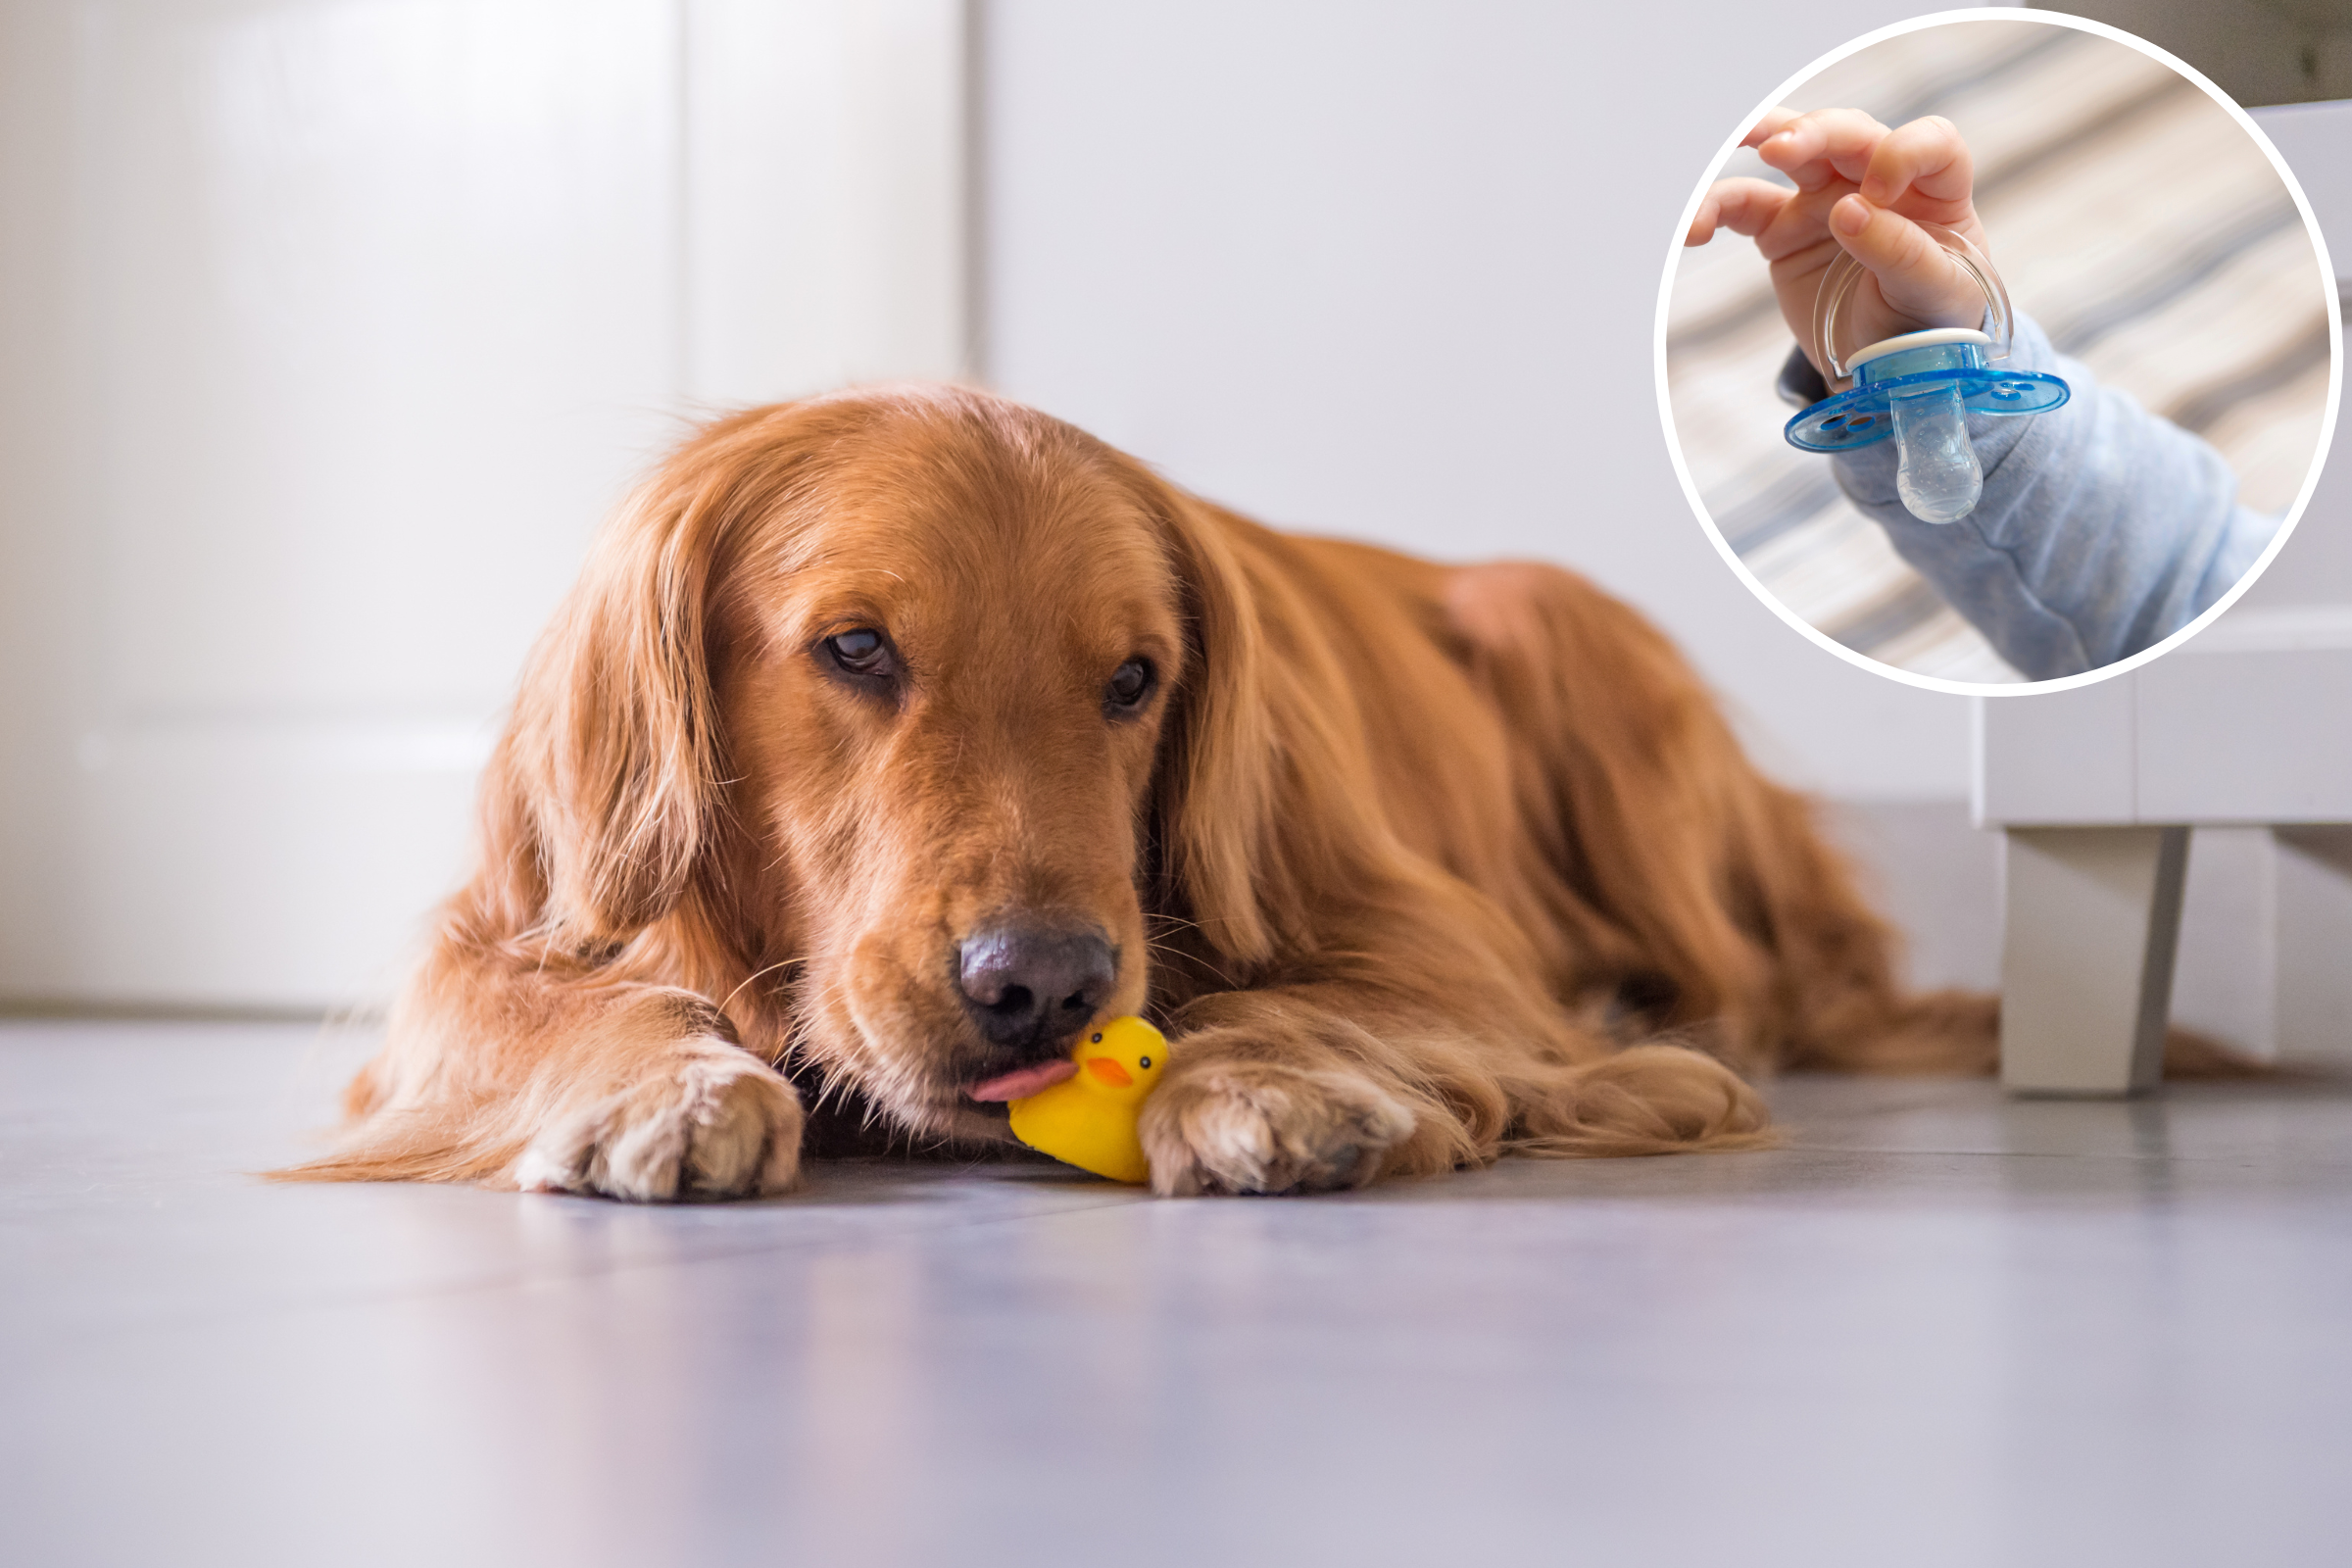 dog pretending use pacifier melts hearts